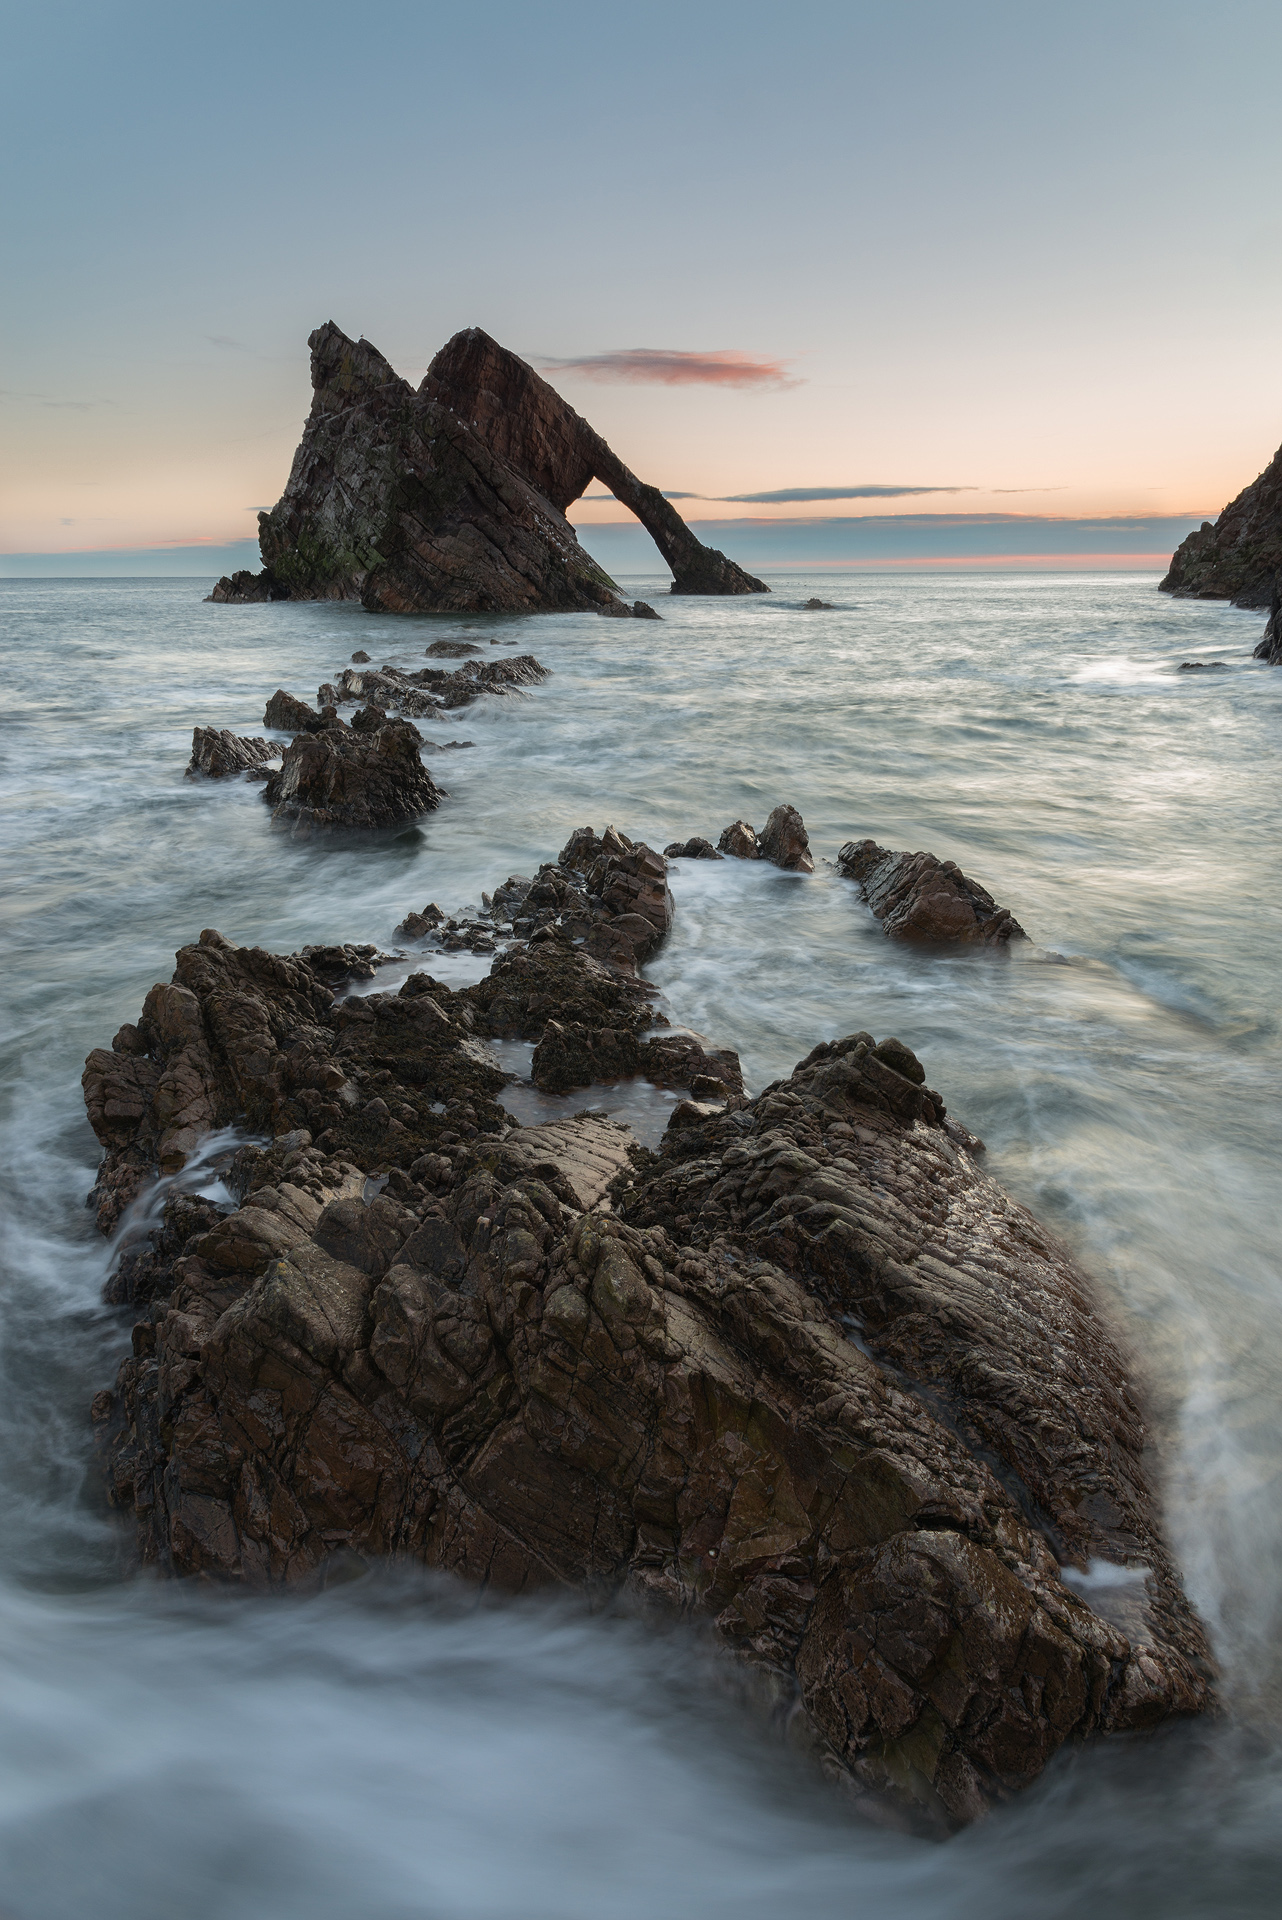 It's a new day, Bow Fiddle Rock